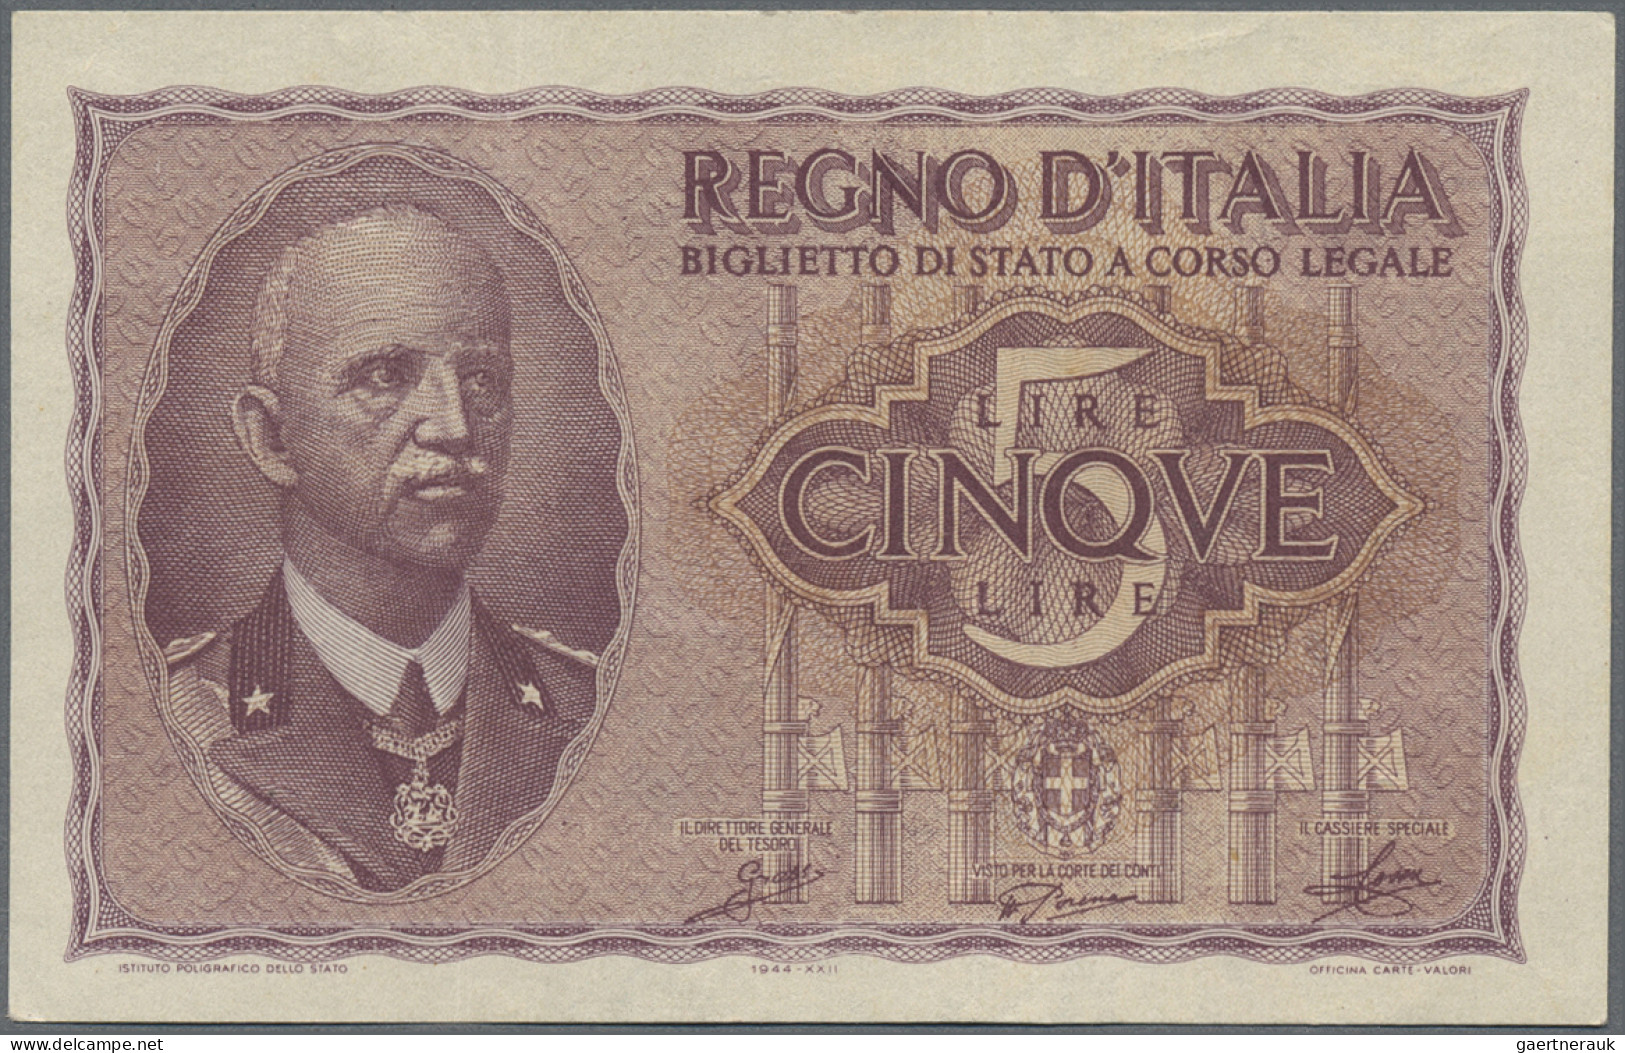 Italy: Regno d'Italia, State & Treasury Notes, lot with 25 banknotes, series 187